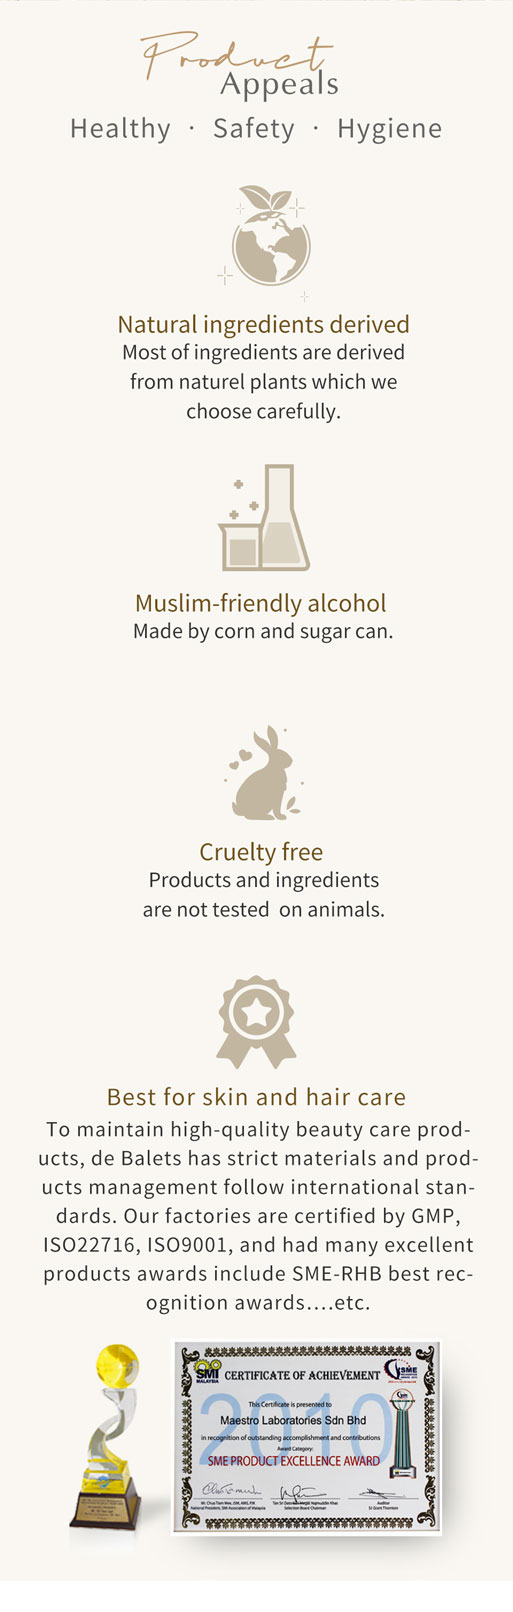 Naturel ingredients derived. Cruelty free. Muslim-friendly alcohol. Best for skin and hair care.